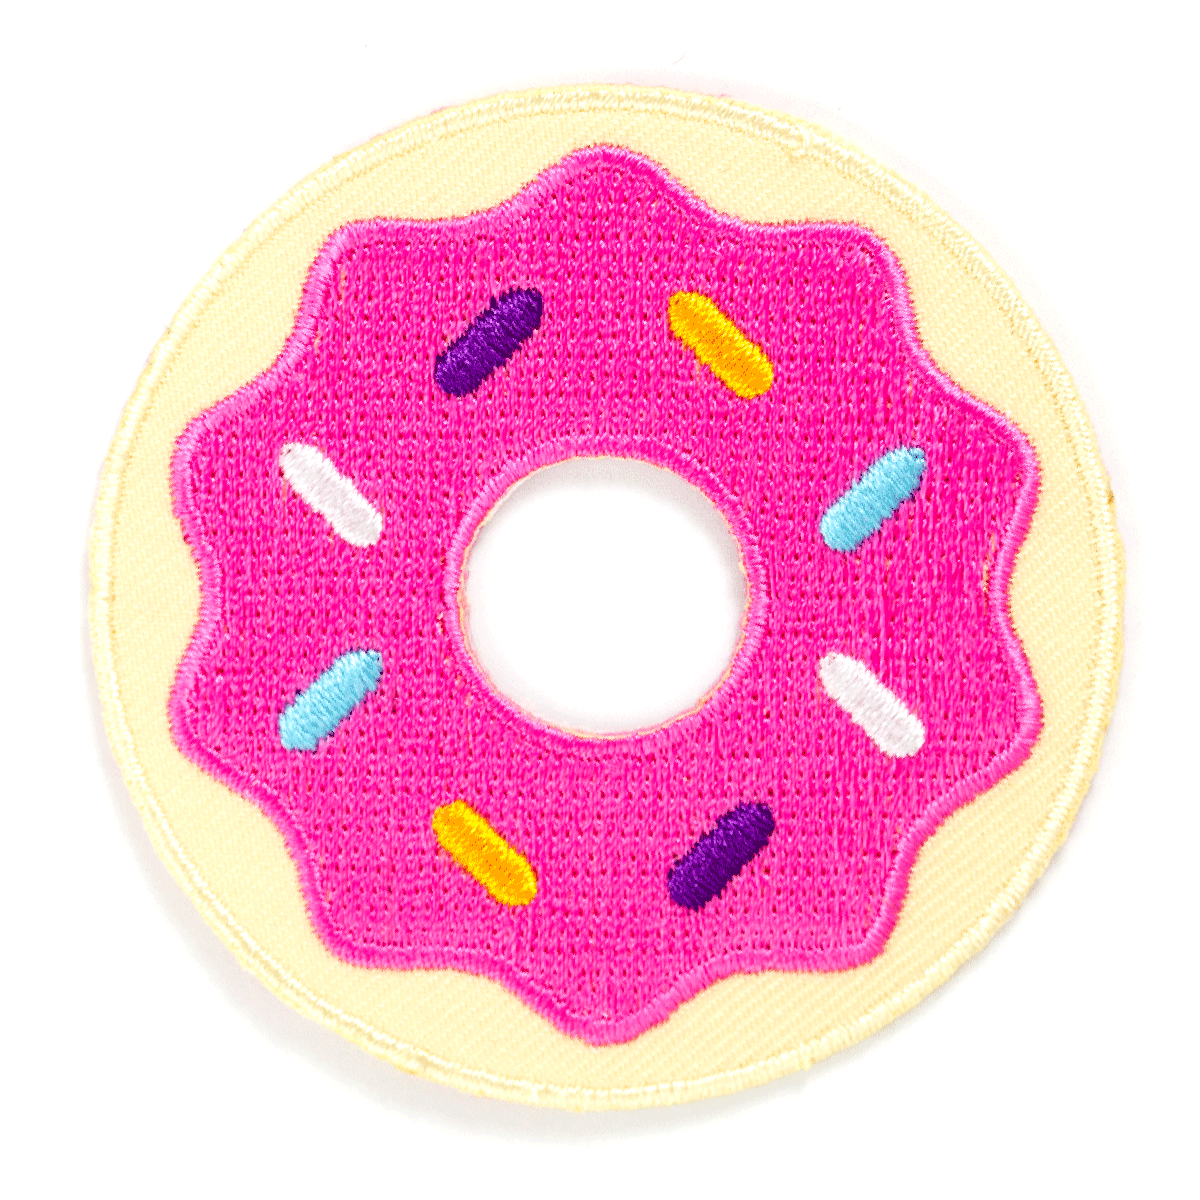 Donut Embroidered Iron-On Patch: 2.5" wide